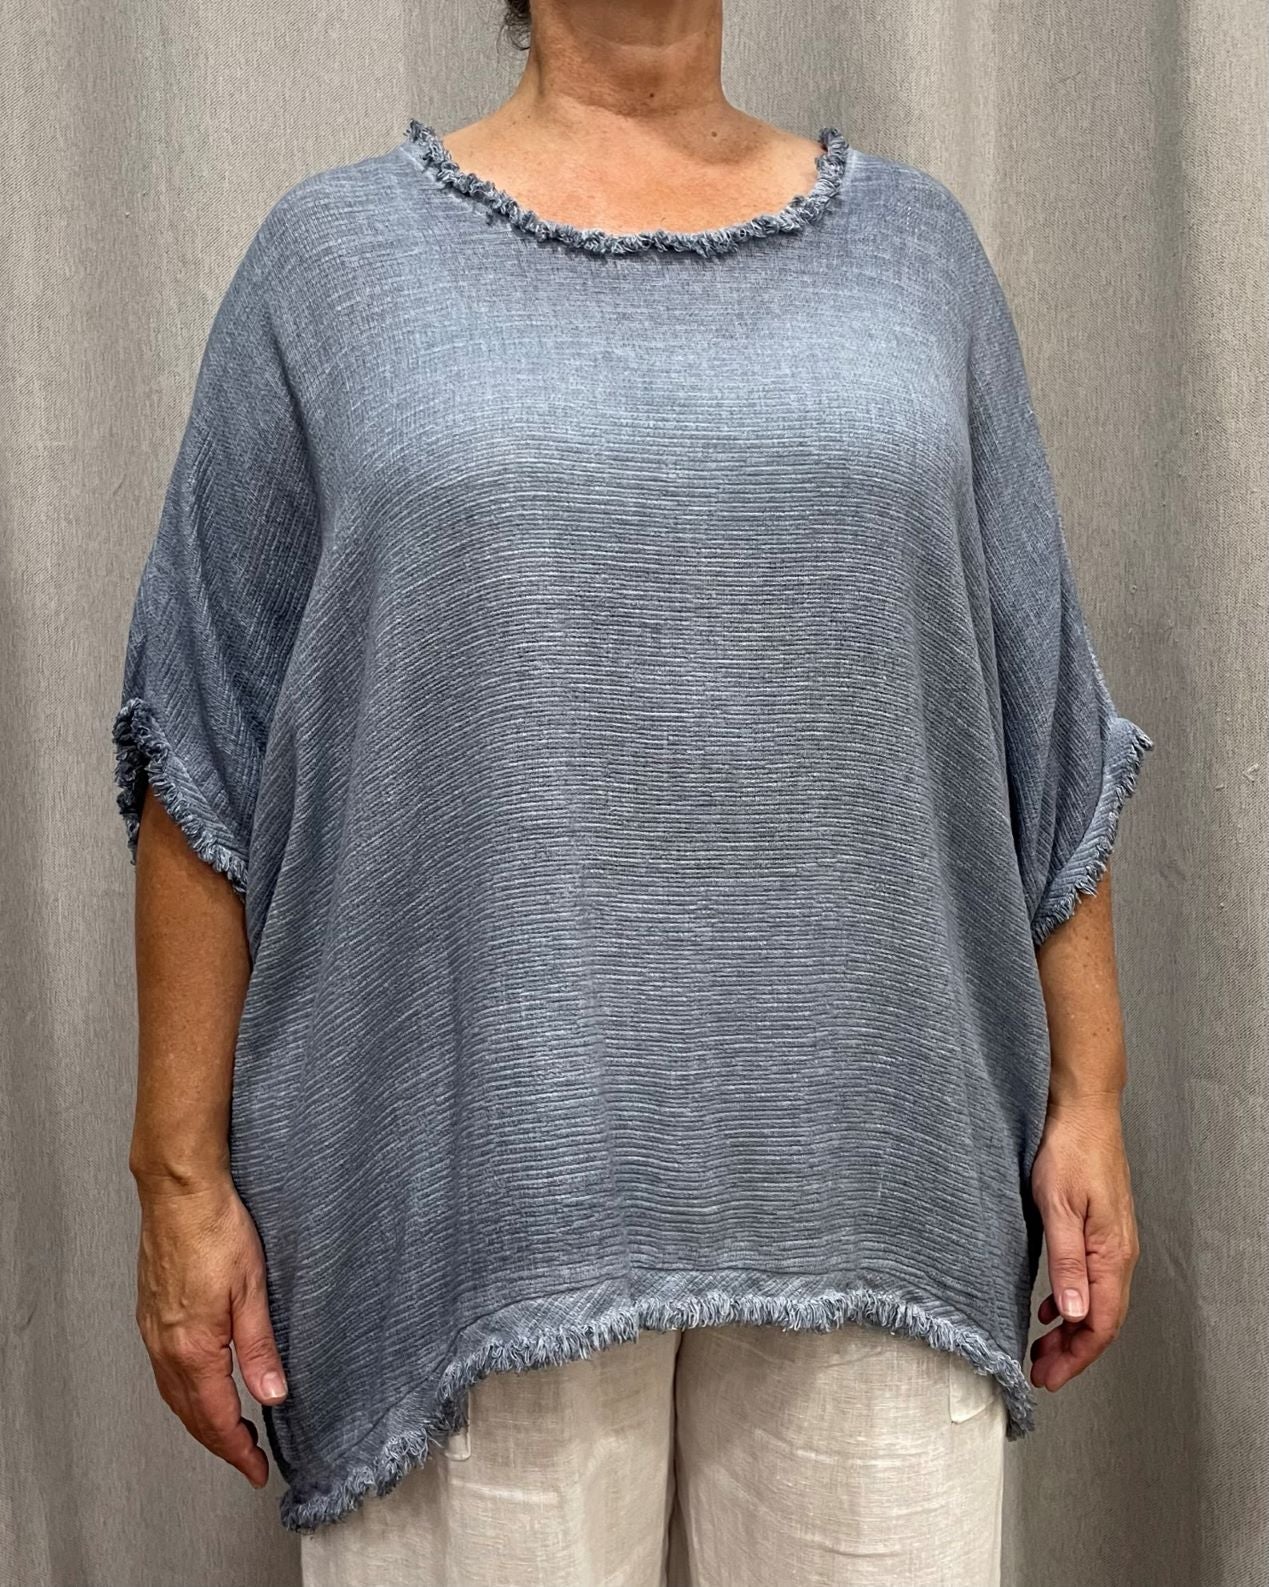 Bootylicious Frayed Hem Cotton Weave Top